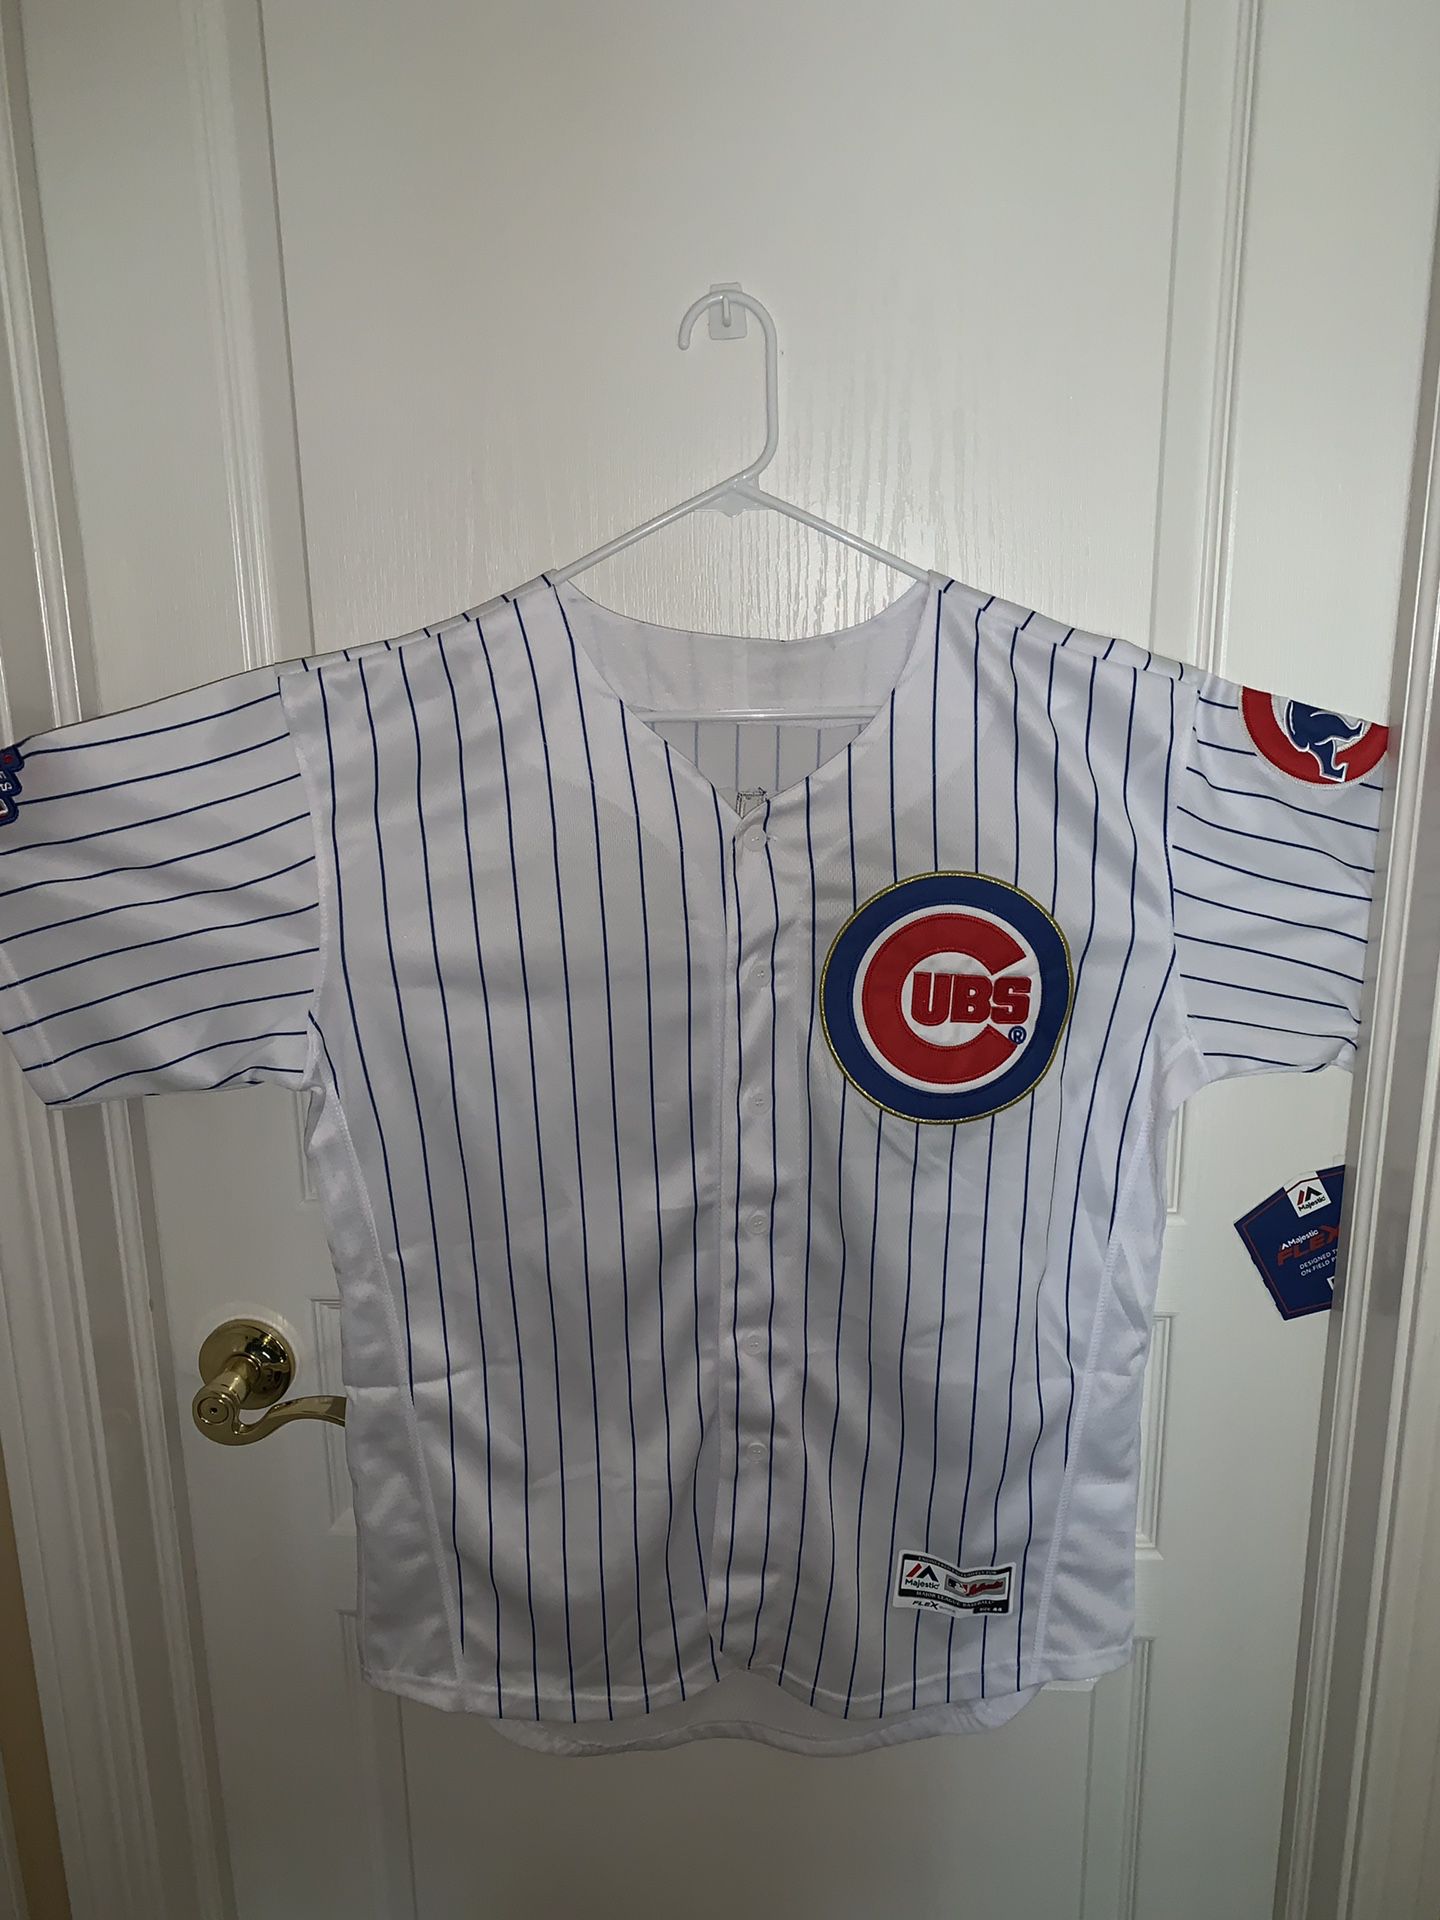 Limited edition Cubs Jersey